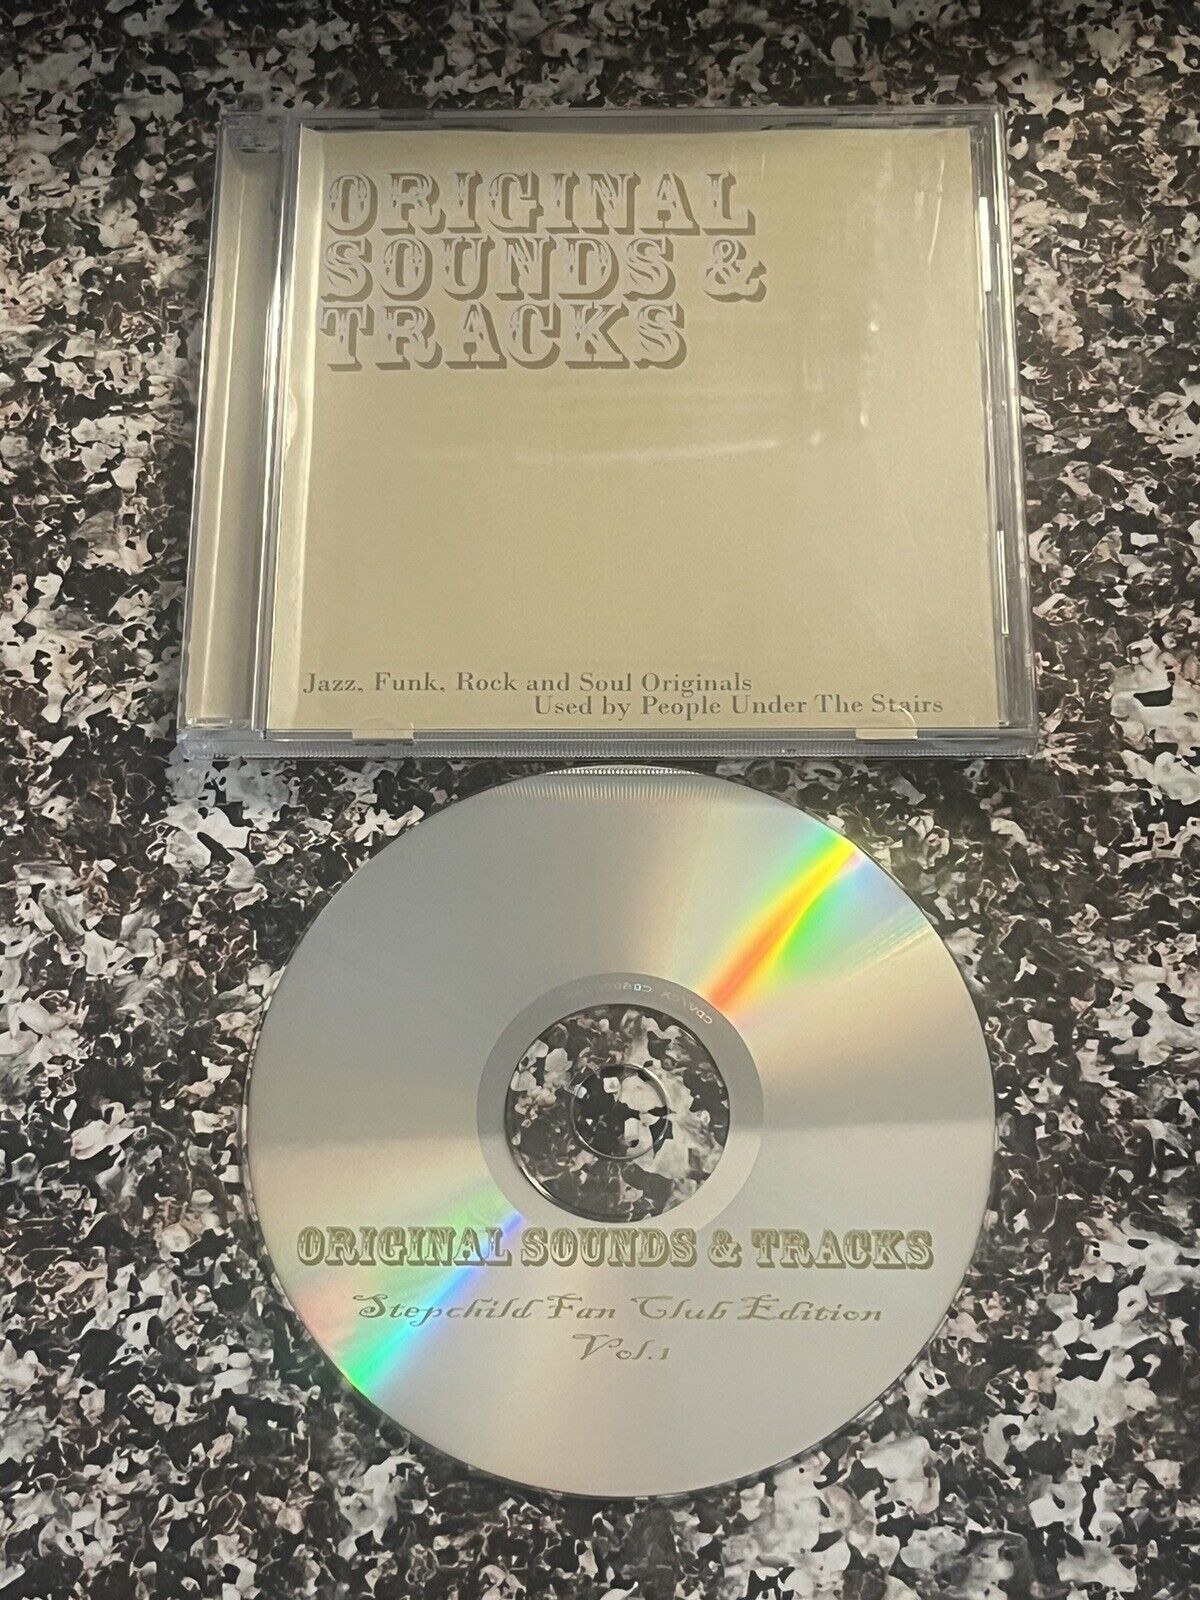 People Under The Stairs - Original Sounds & Tracks CD RARE HTF Compilation